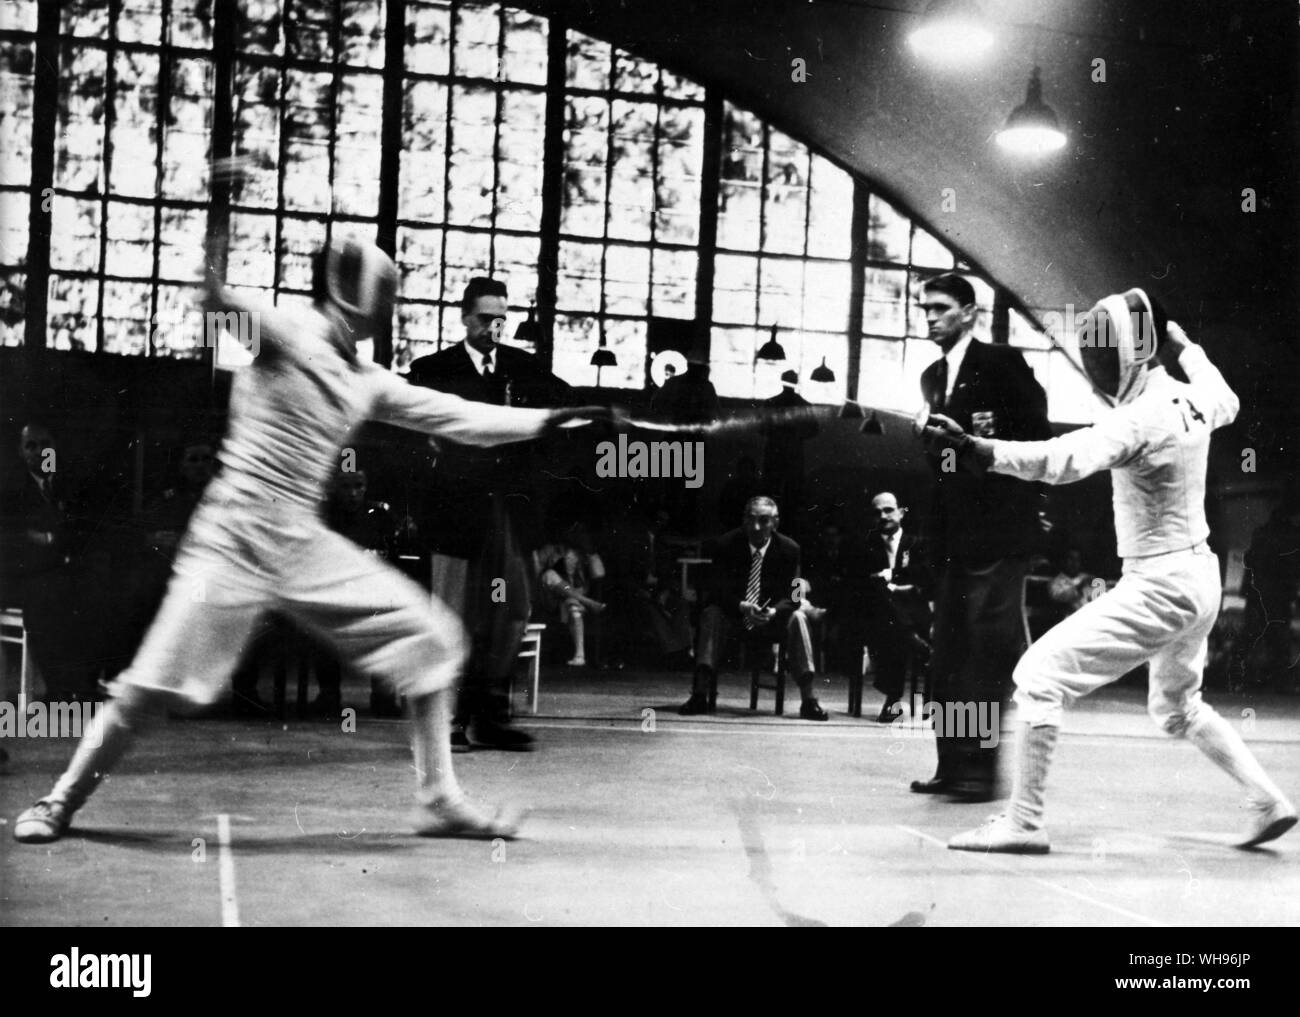 Finland,Helsinki/ Olympics,1952: D'Oriola of France and Mangiarotti of Italy during their foil fencing match at West-End. Stock Photo